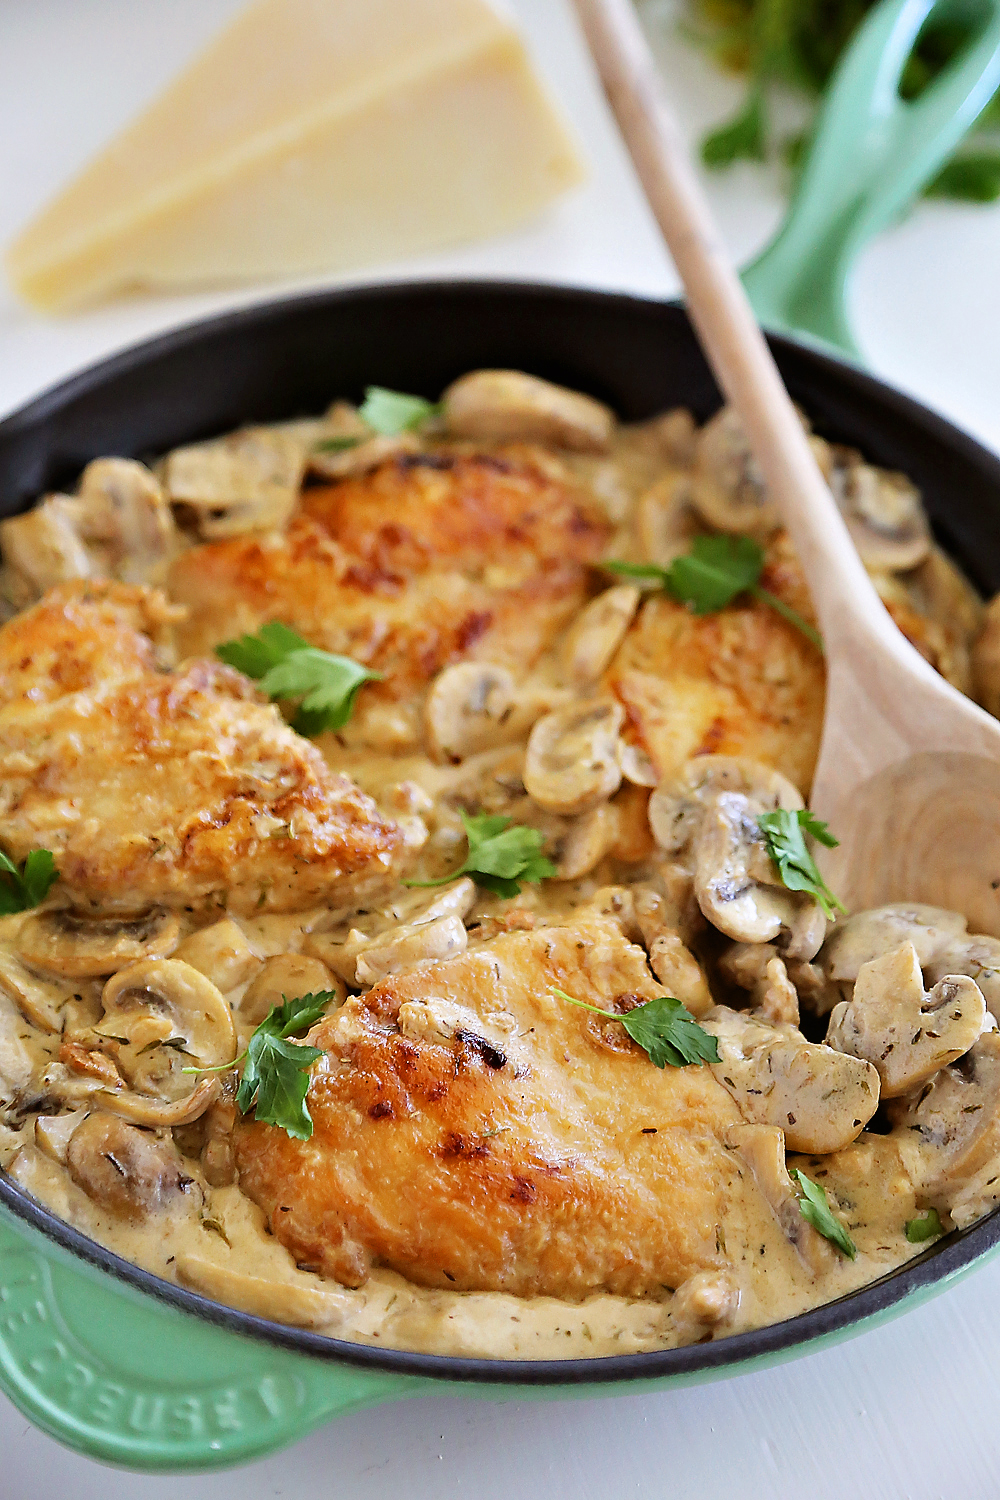 Creamy Chicken and Mushroom Skillet - Delicious chicken dinner in a mushroom cream sauce, made easily in one skillet. Serve with pasta and salad! Thecomfortofcooking.com